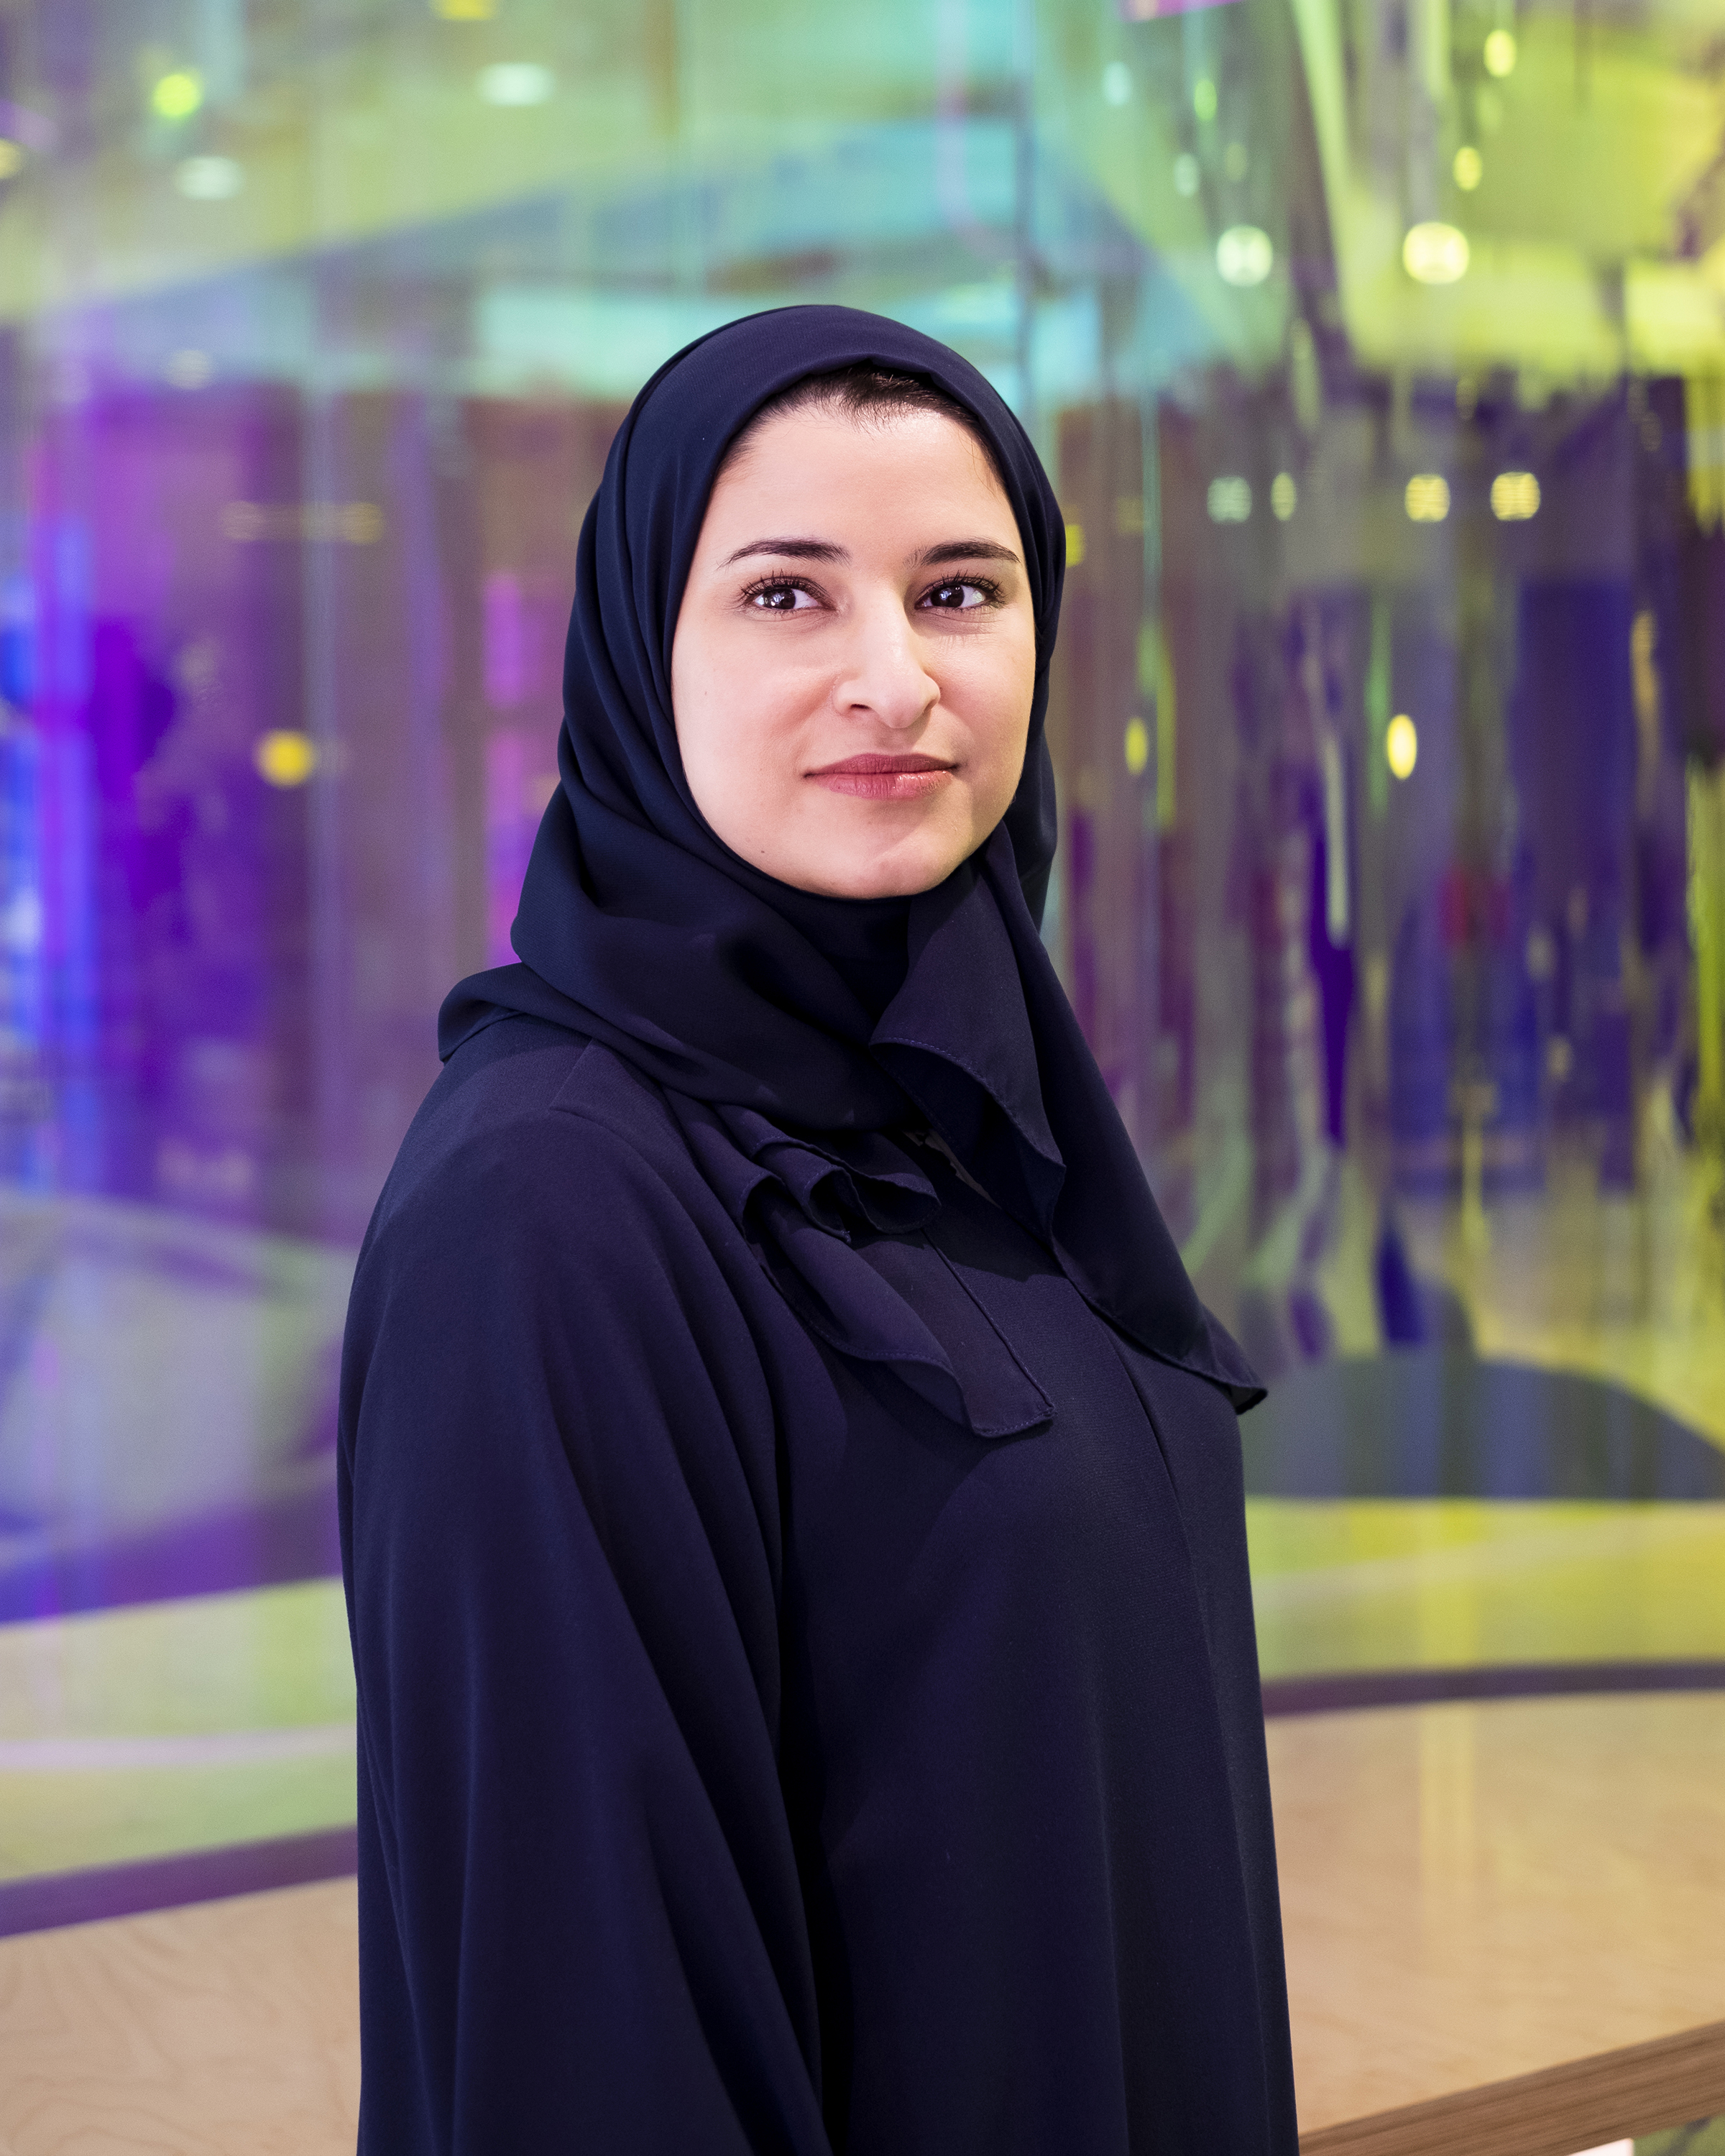 Sarah Al Amiri, the U.A.E. Minister of State for Advanced Technology and Chairwoman of the UAE Space Agency, photographed in Dubai, United Arab Emirates on Jan. 25, 2022. (Natalie Naccache for TIME)